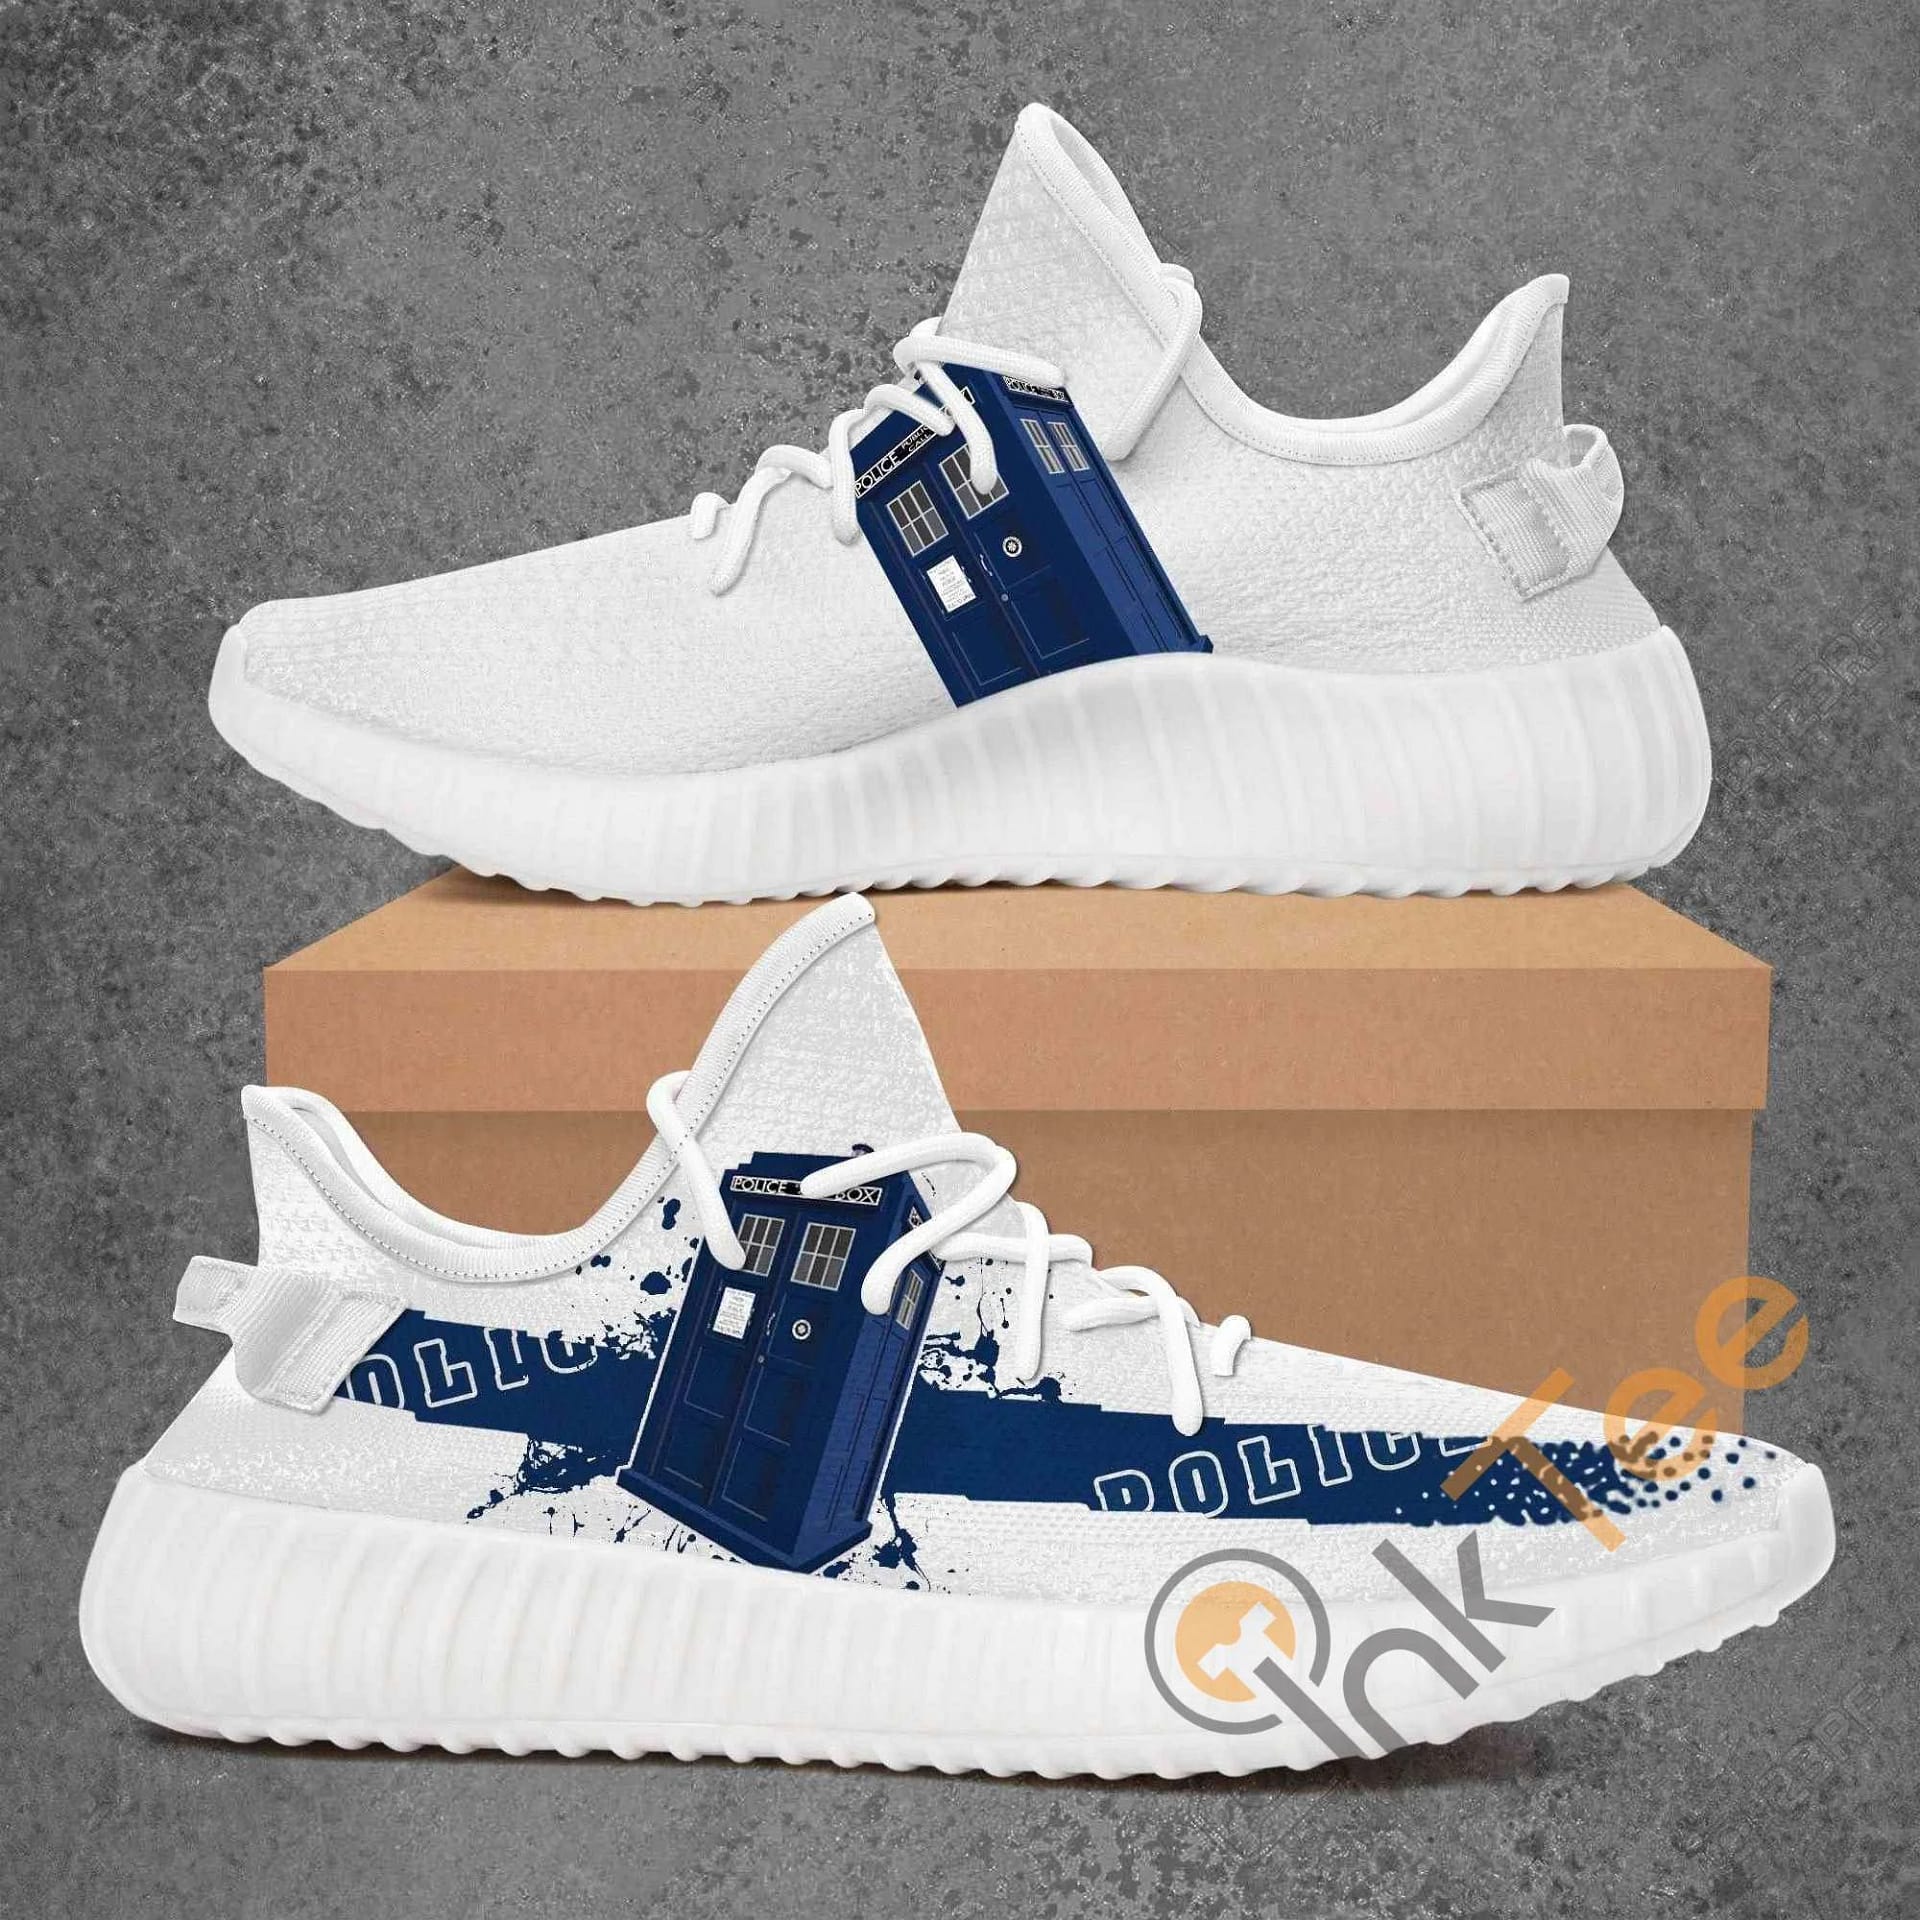 Police Box Dr Who Amazon Best Selling Yeezy Boost